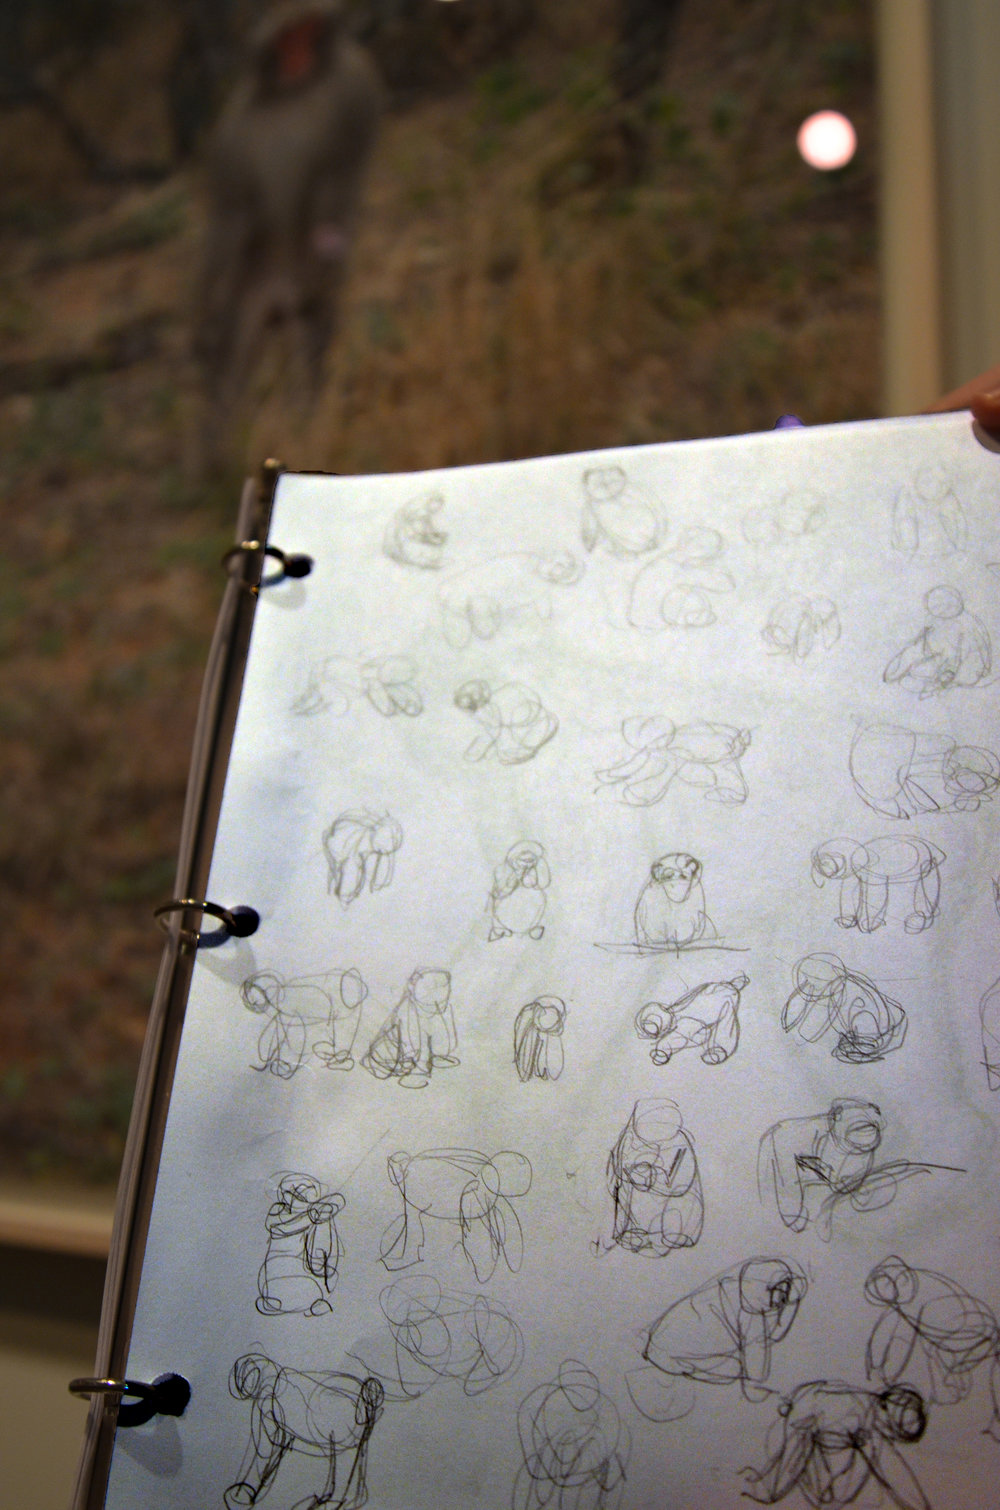 William Wise's gesture drawings of Shimabuku's video “Do snow monkeys remember snow mountains?"